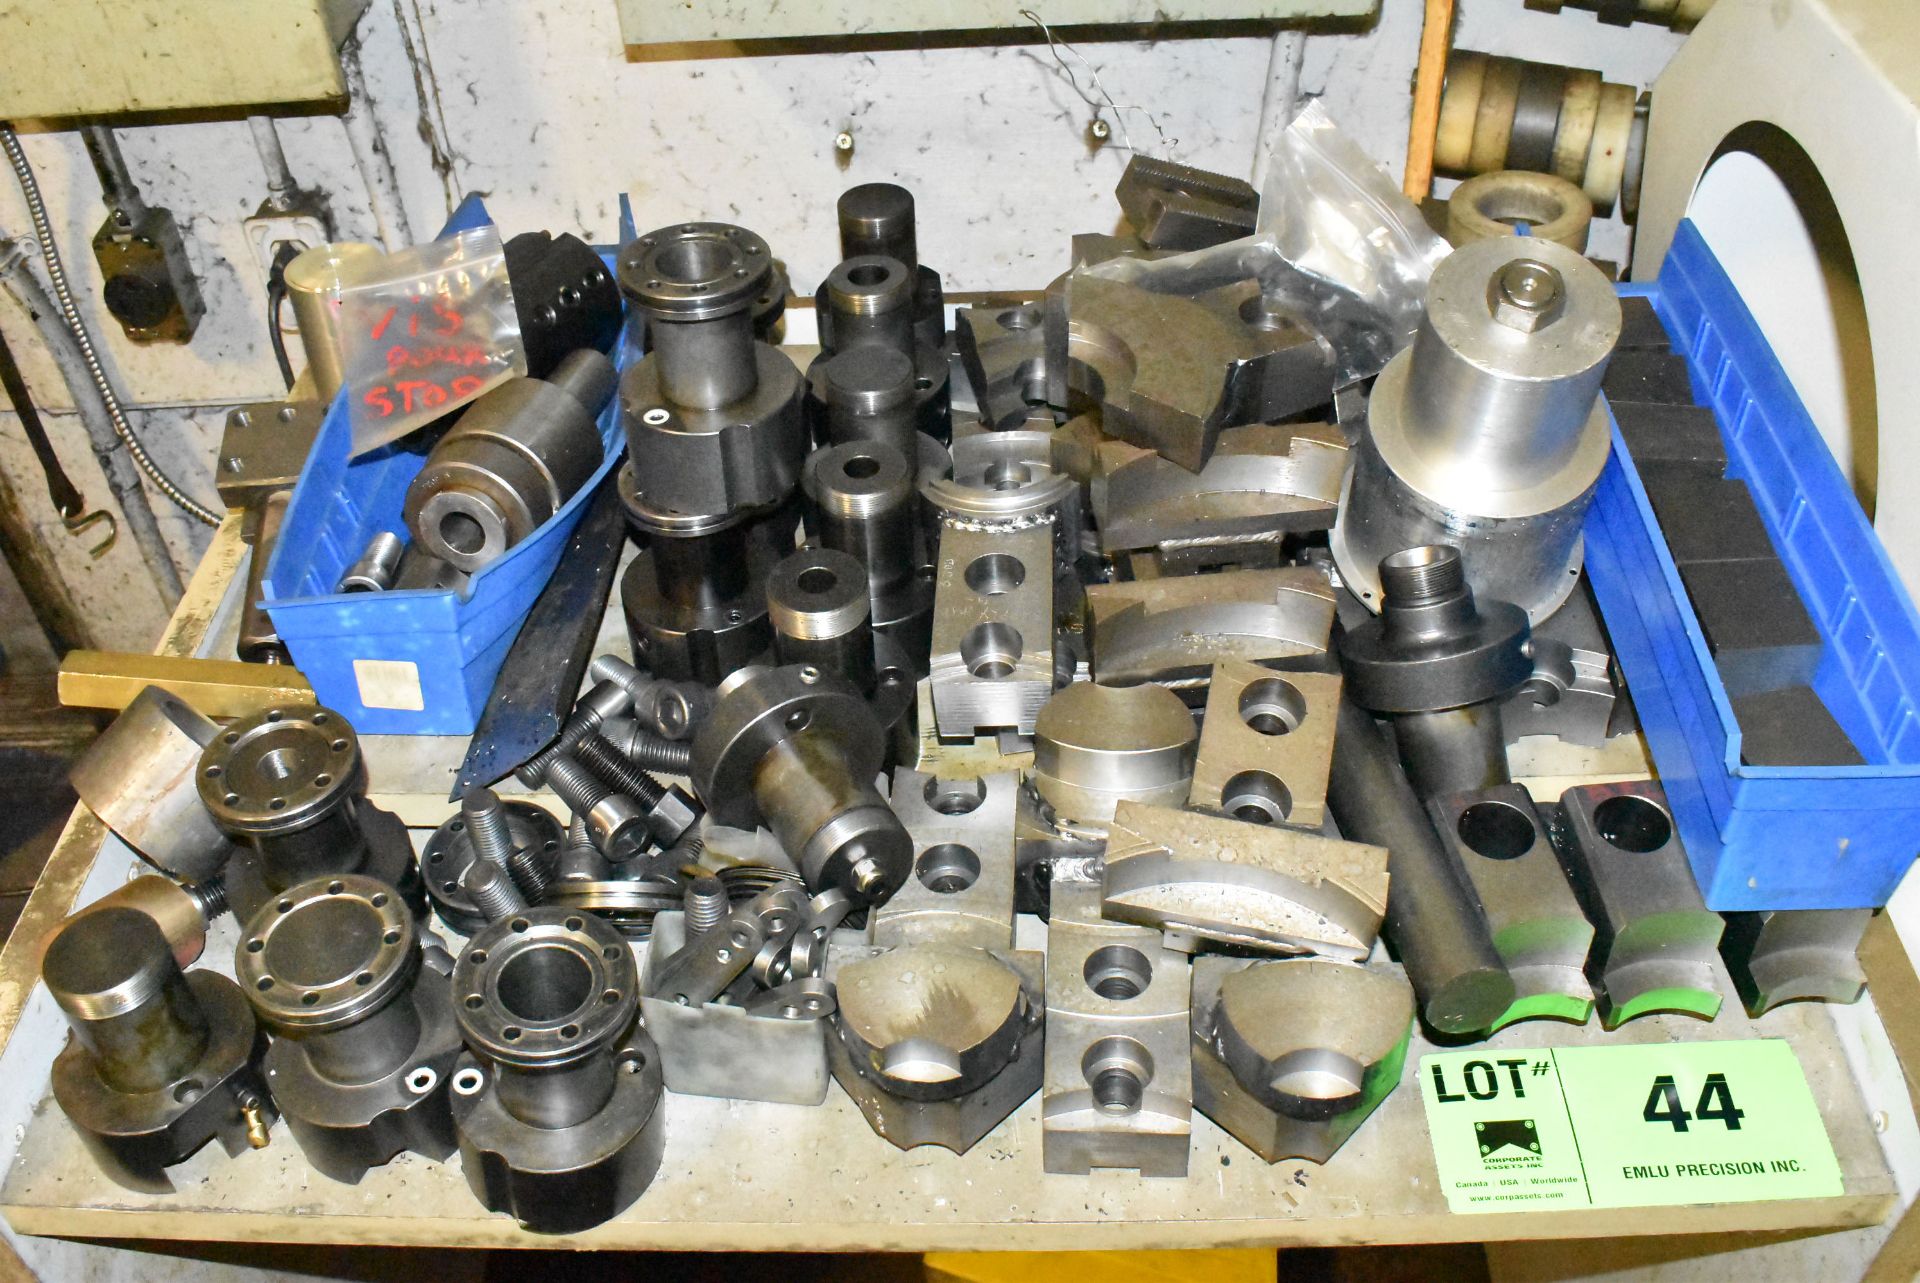 LOT/ TURNING CENTER ACCESSORIES AND CHUCK JAWS